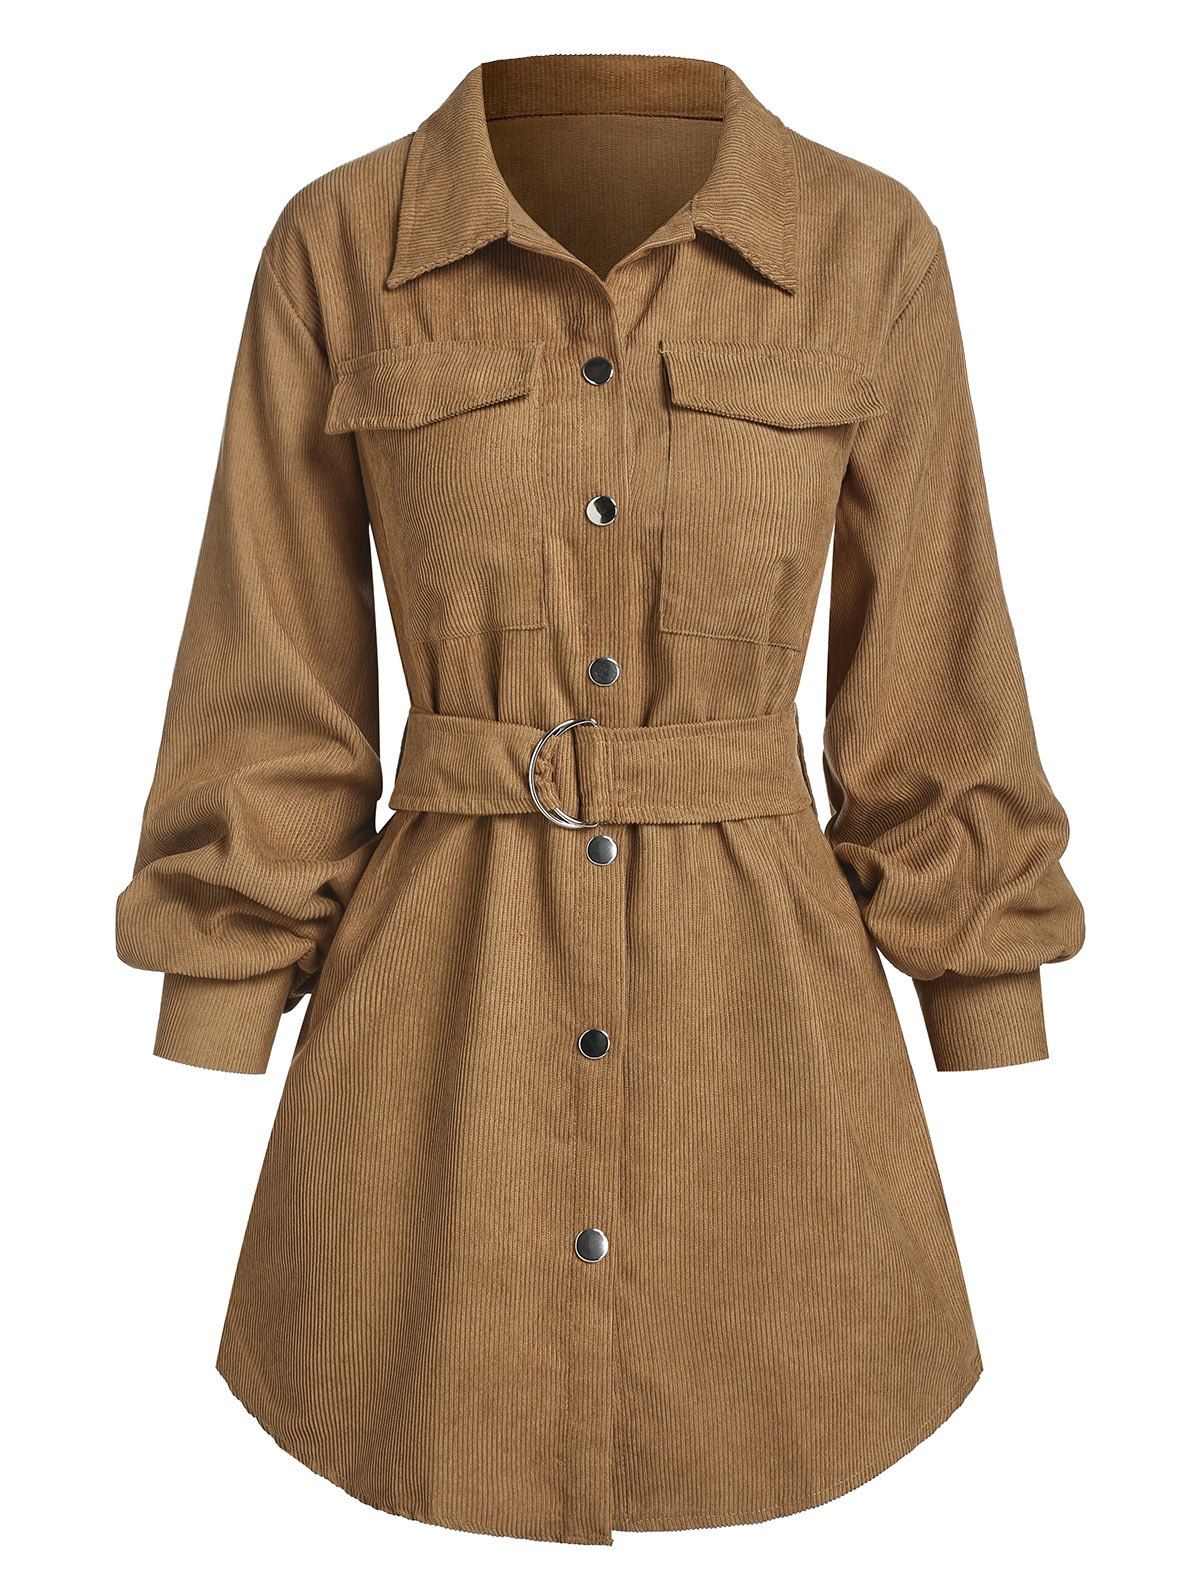 Button Up Corduroy Belted Coat - COFFEE M